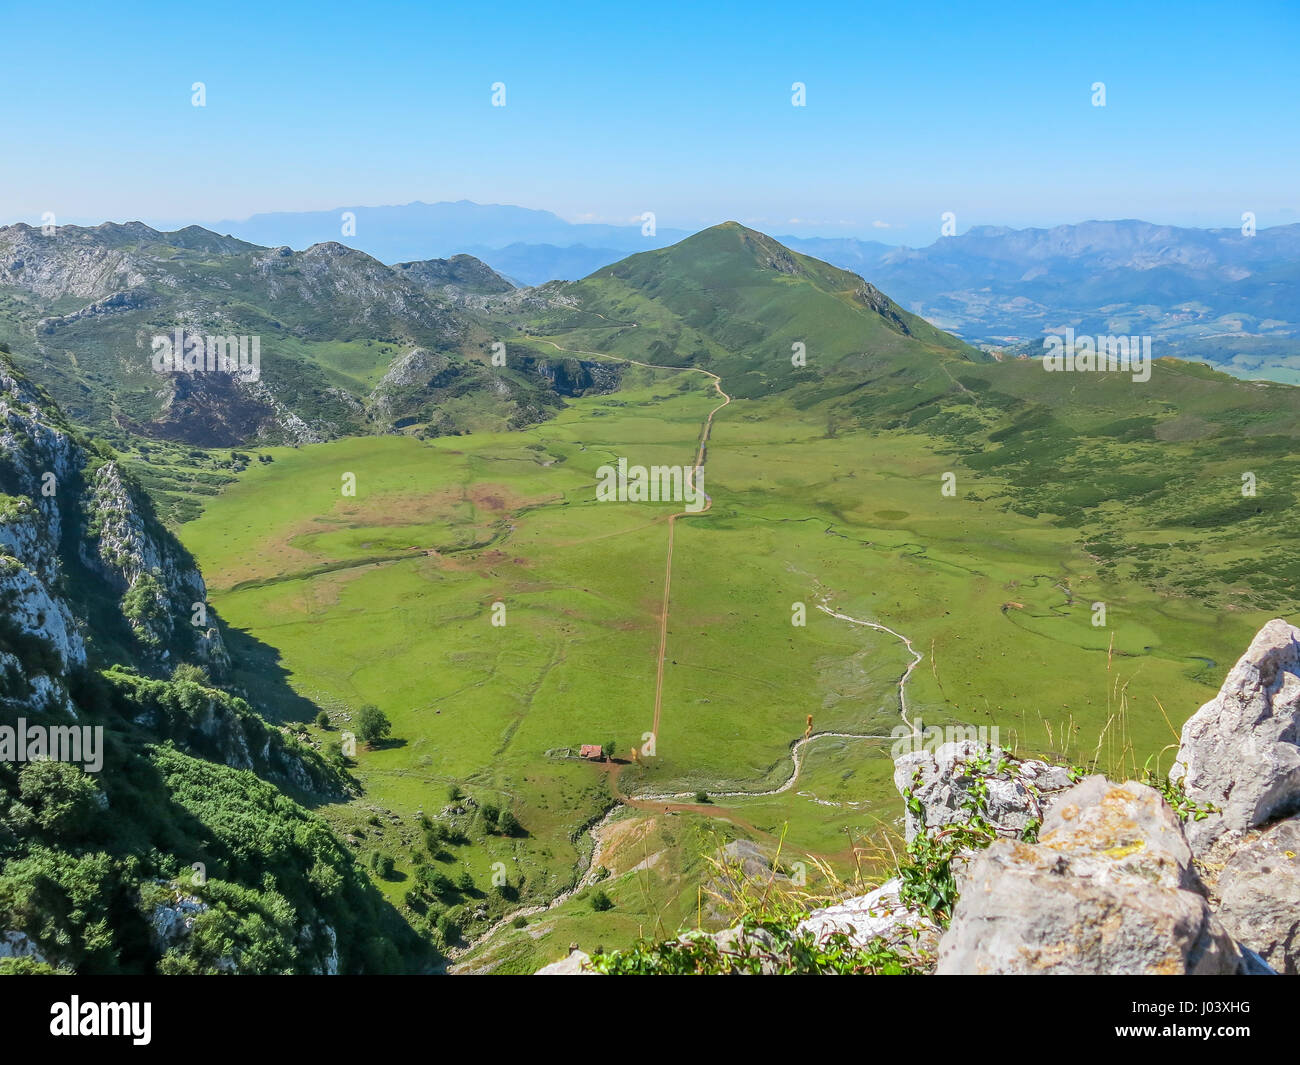 Scenic view in Covadonga, Asturias, northern Spain Stock Photo